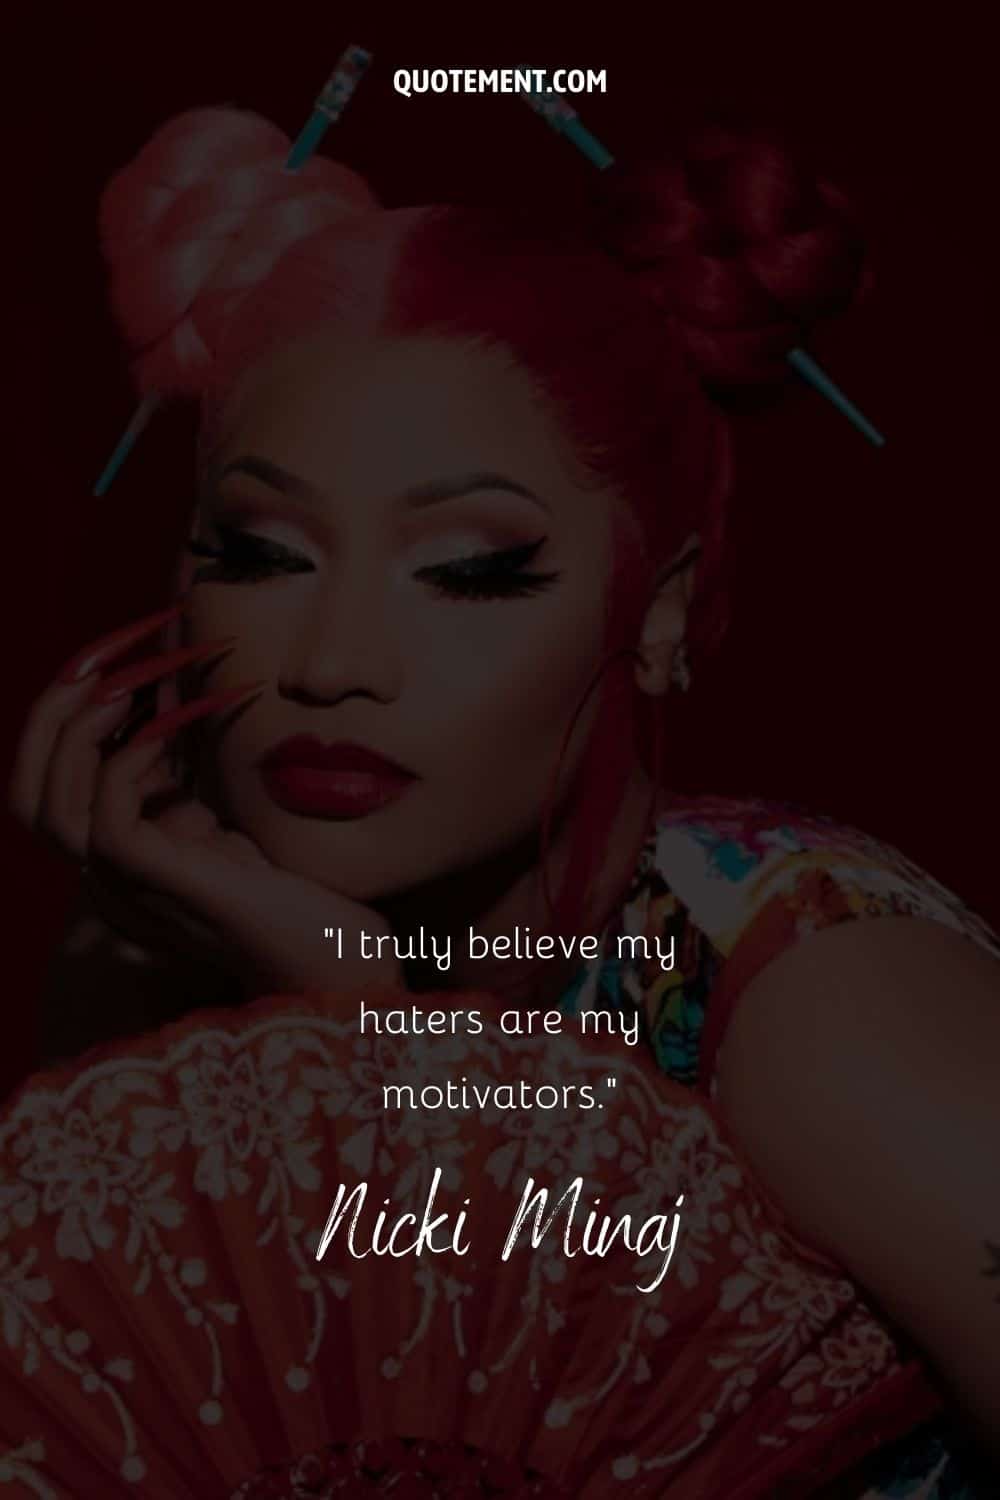 Motivational quote on haters by Nicki Minaj, and her photo in the background